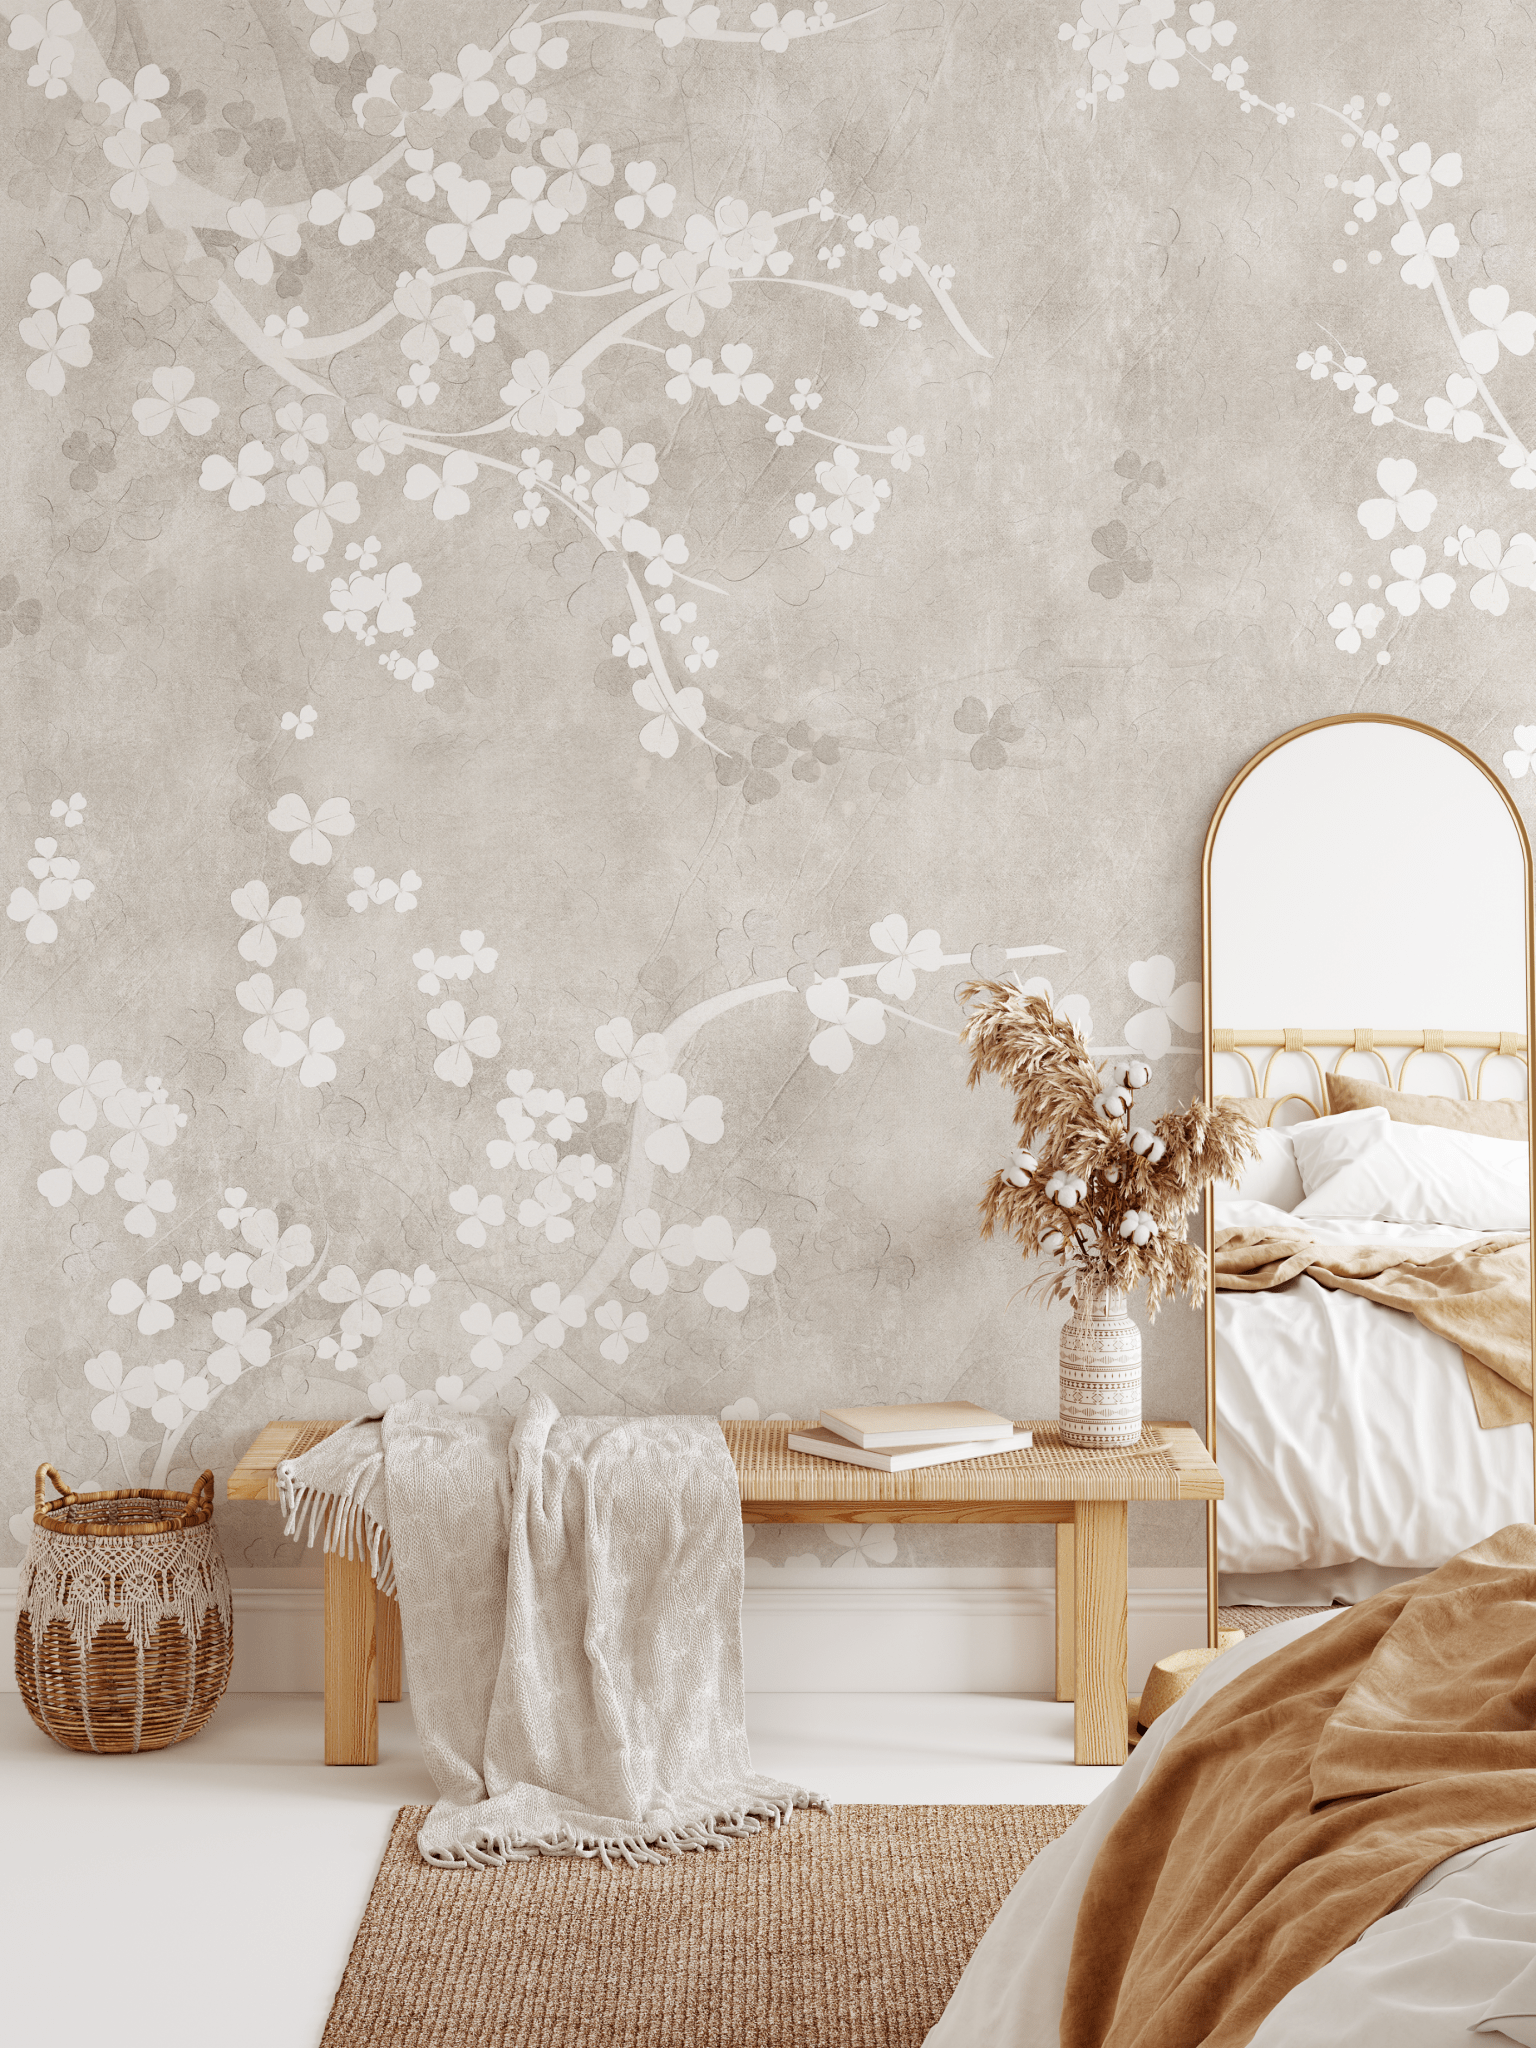 A bedroom featuring a natural beige fresco wall mural with a delicate floral pattern, a gold-framed mirror, and earth-toned bedding